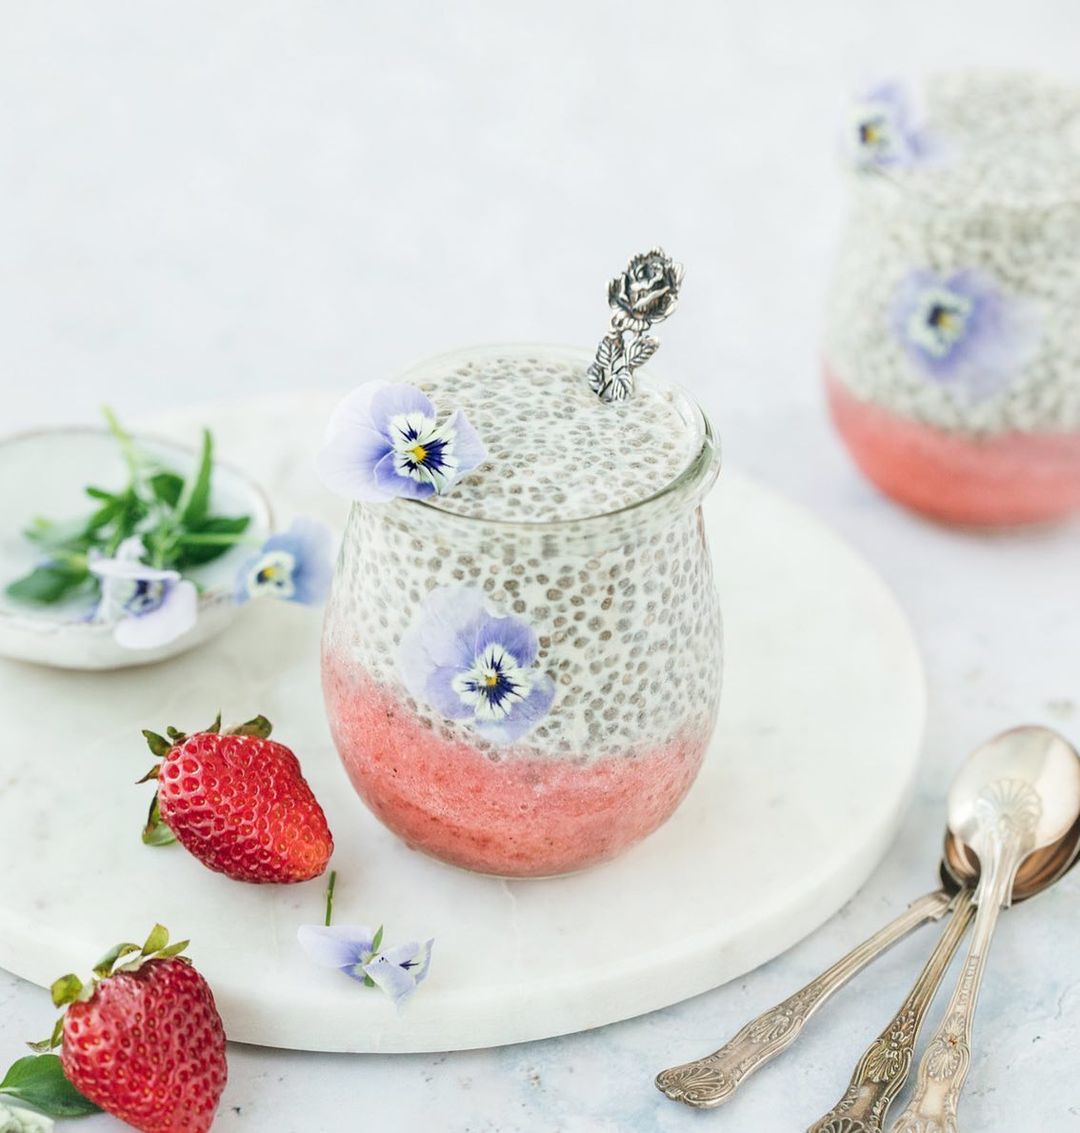 Lavender and Earl Grey Chia Pudding